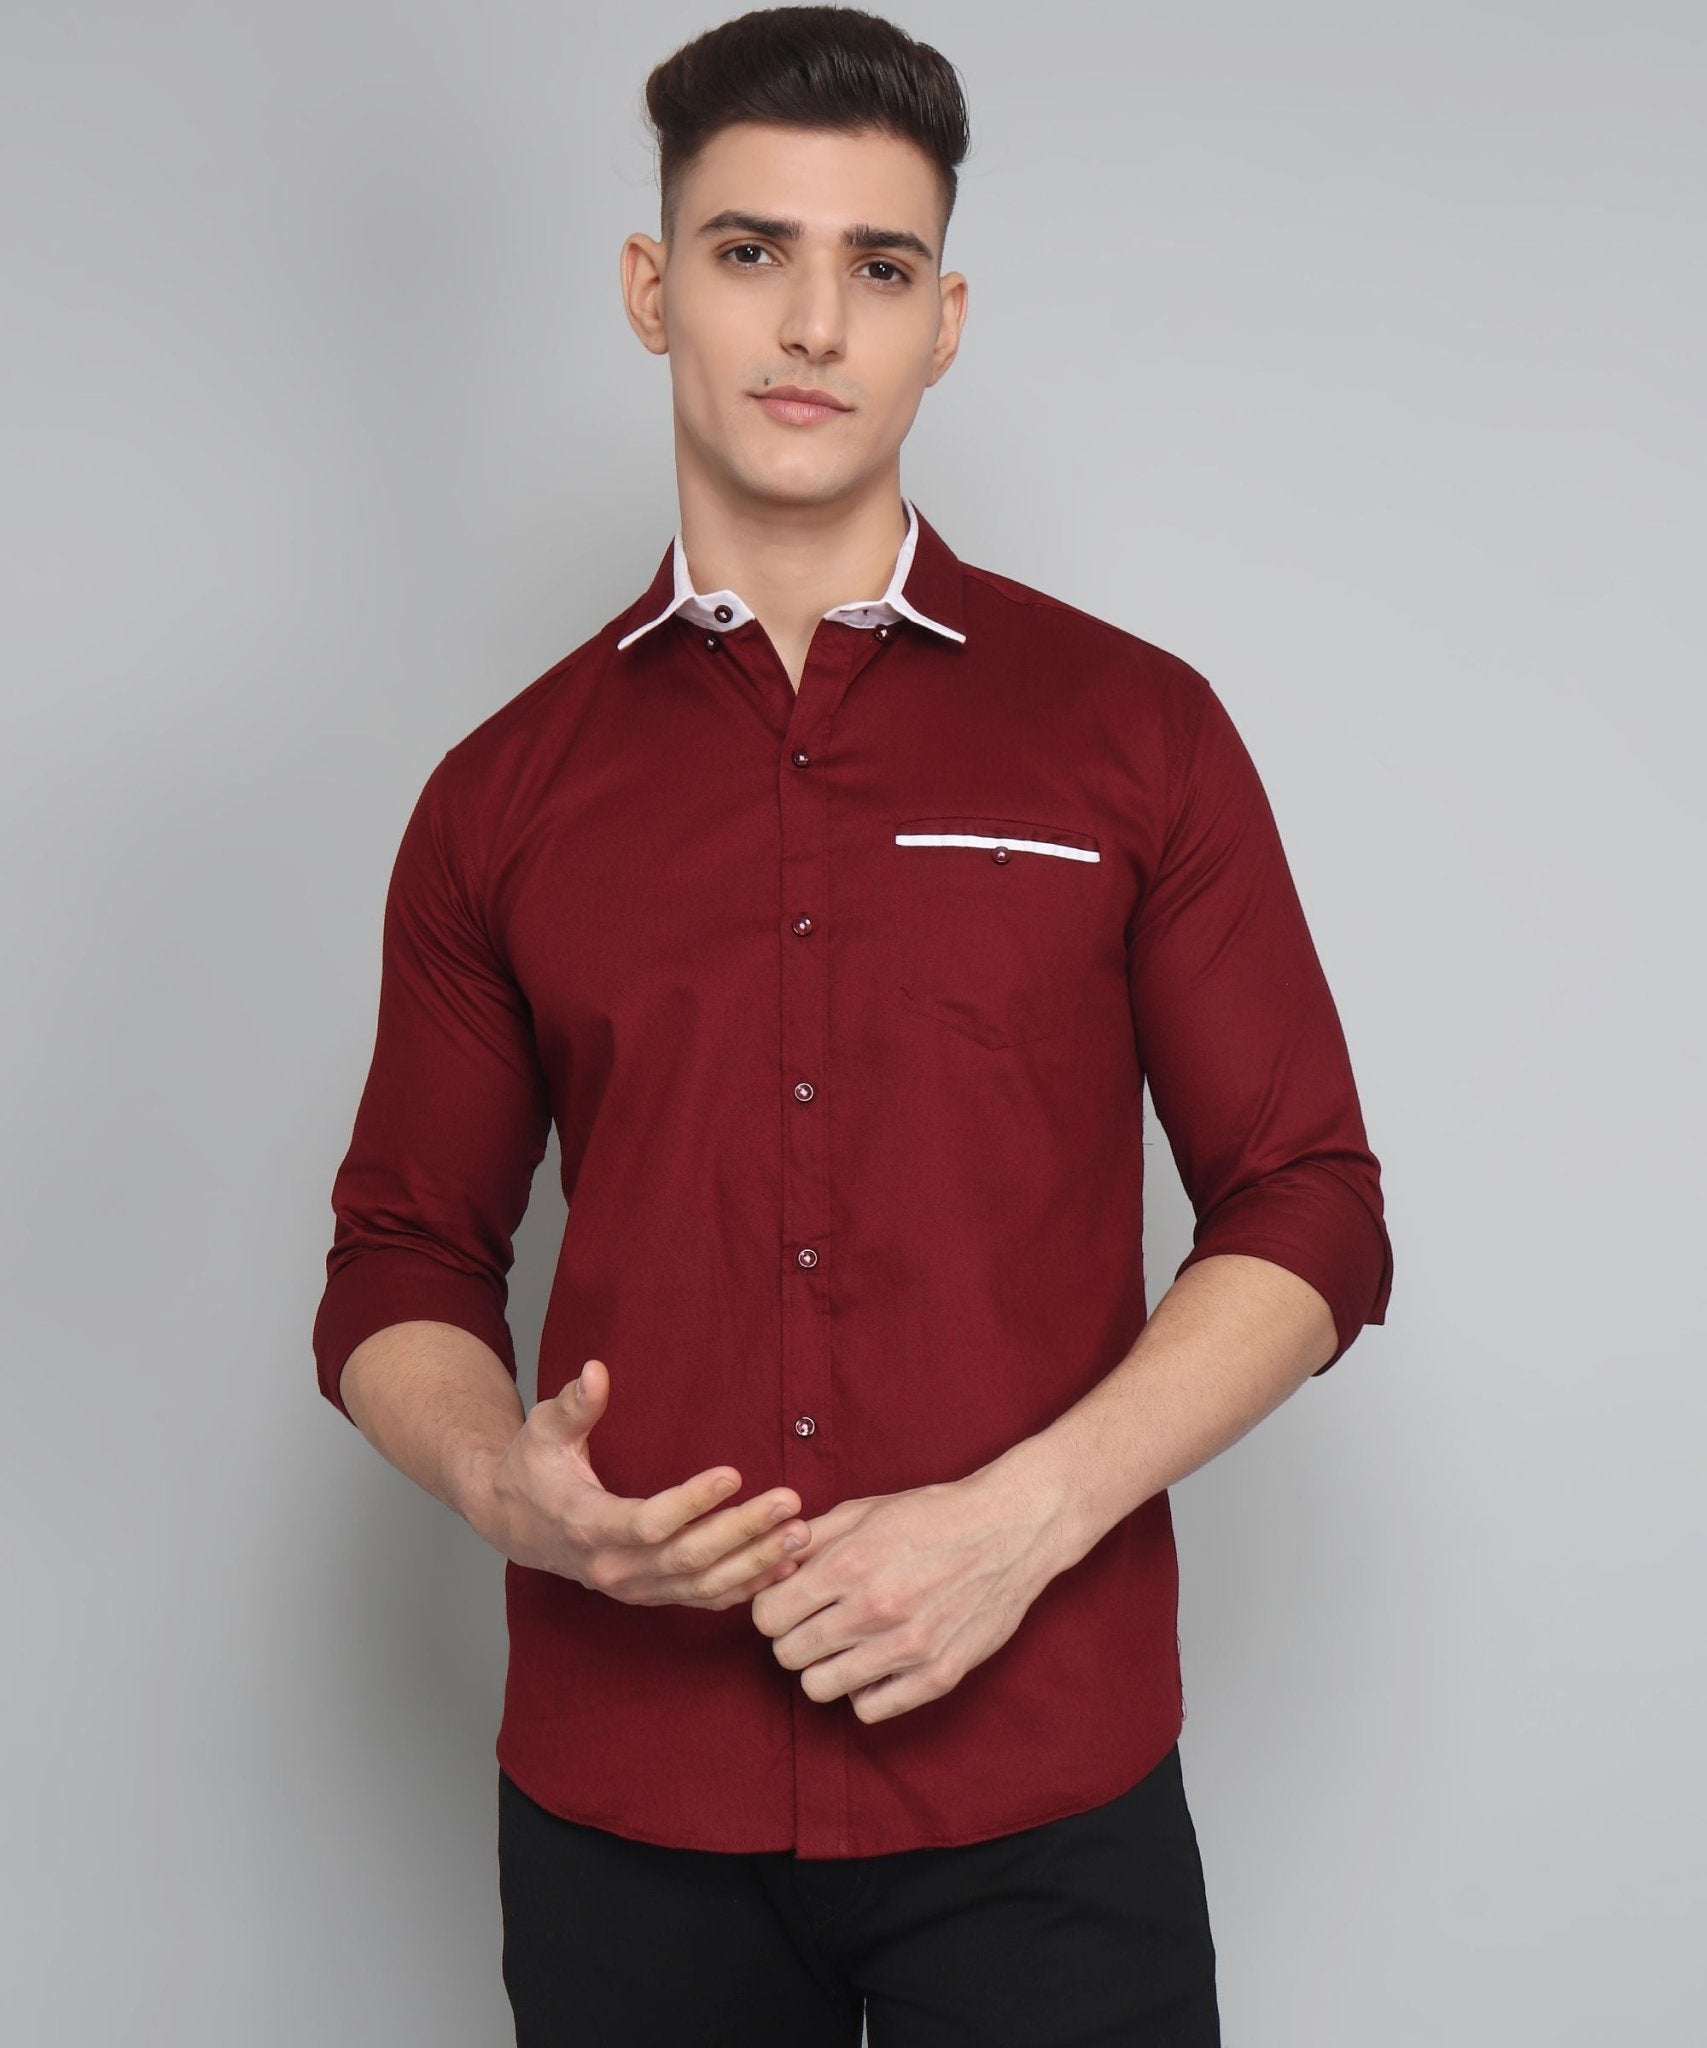 Exclusive TryBuy Premium Maroon Cotton Casual Shirt for Men - TryBuy® USA🇺🇸